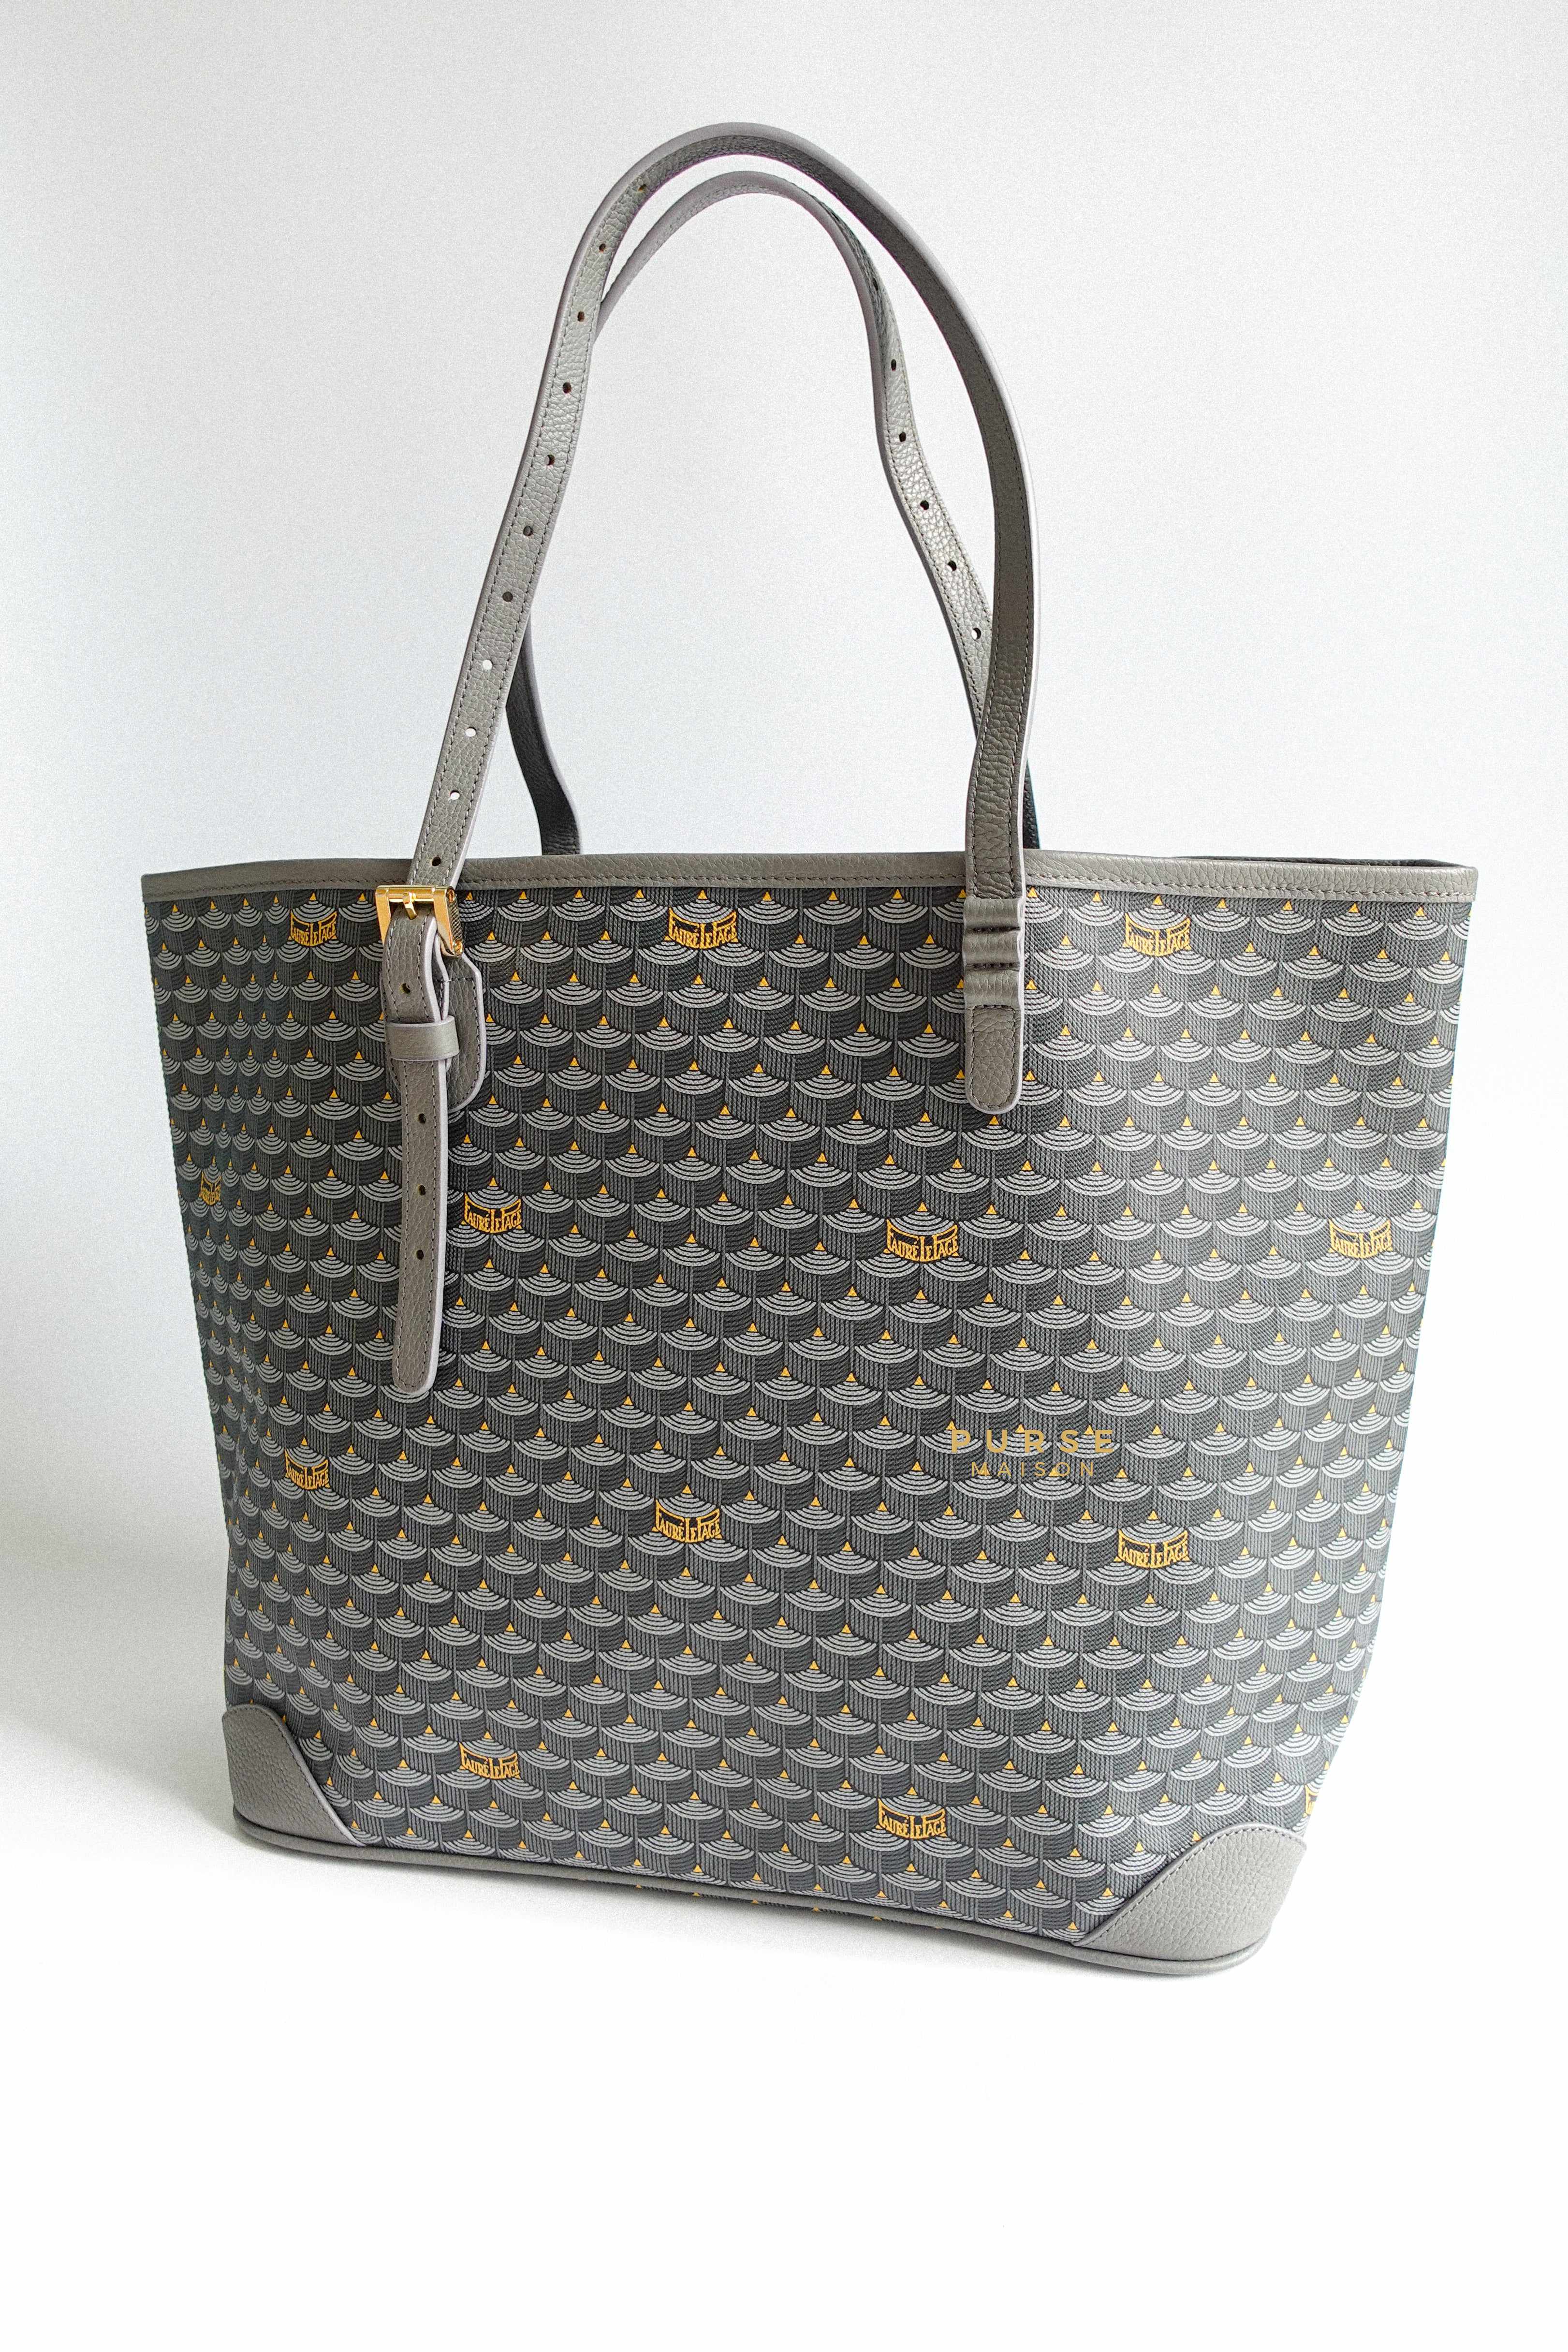 Fauré Le Page Daily Battle 35 Tote in Gray